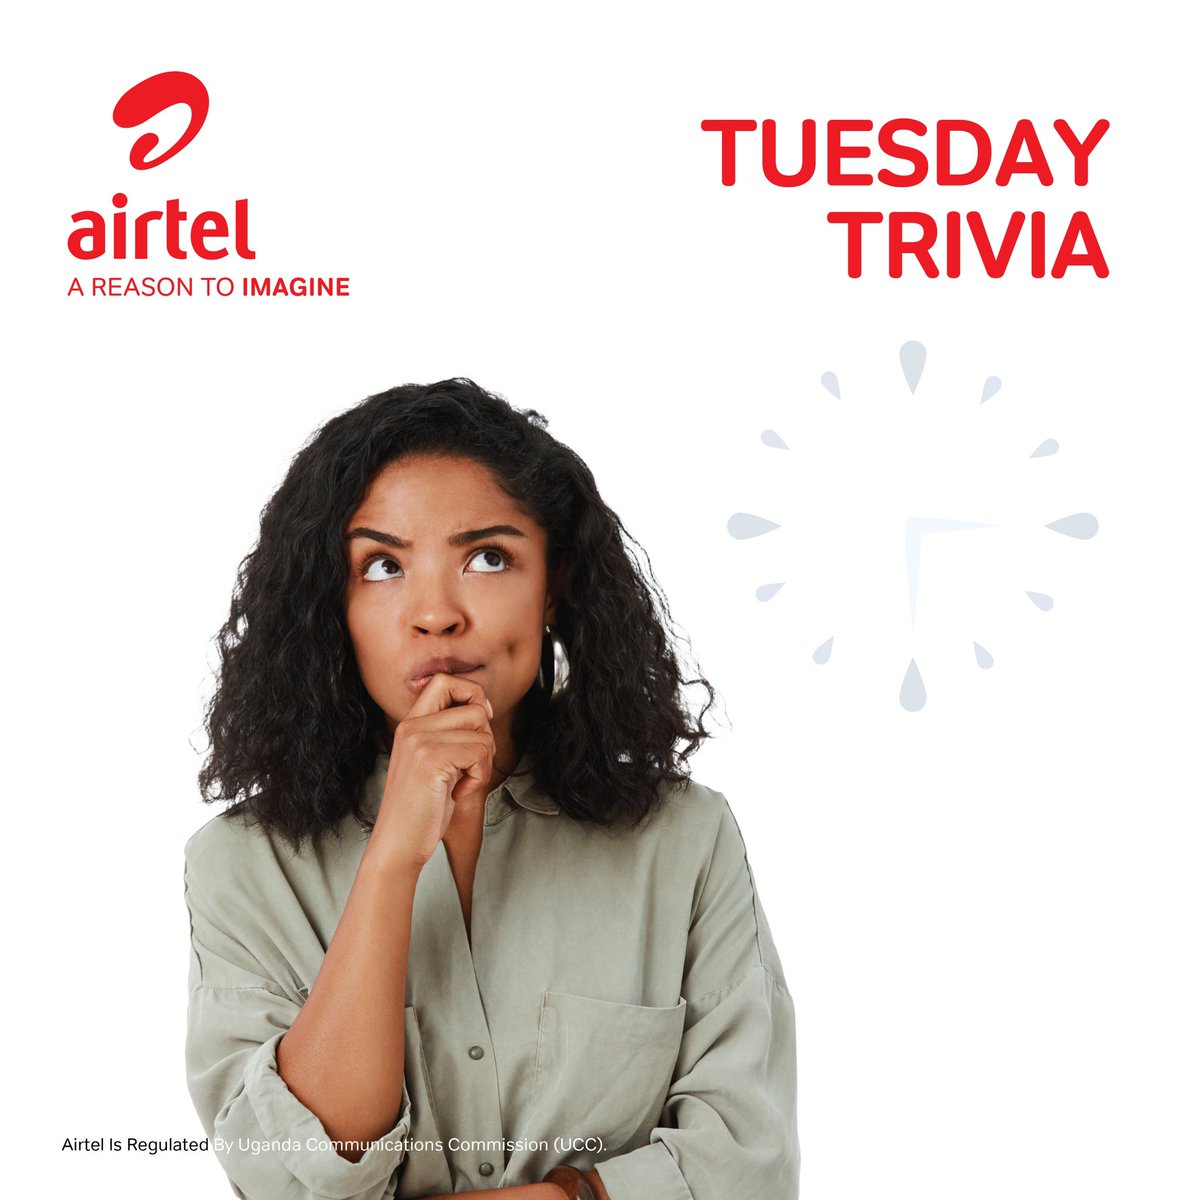 New day, new trivia, #CallBoona bundles to be won. First 3 correct answers.
Which planet is known as the 'Red Planet'?
#AirtelTrivia